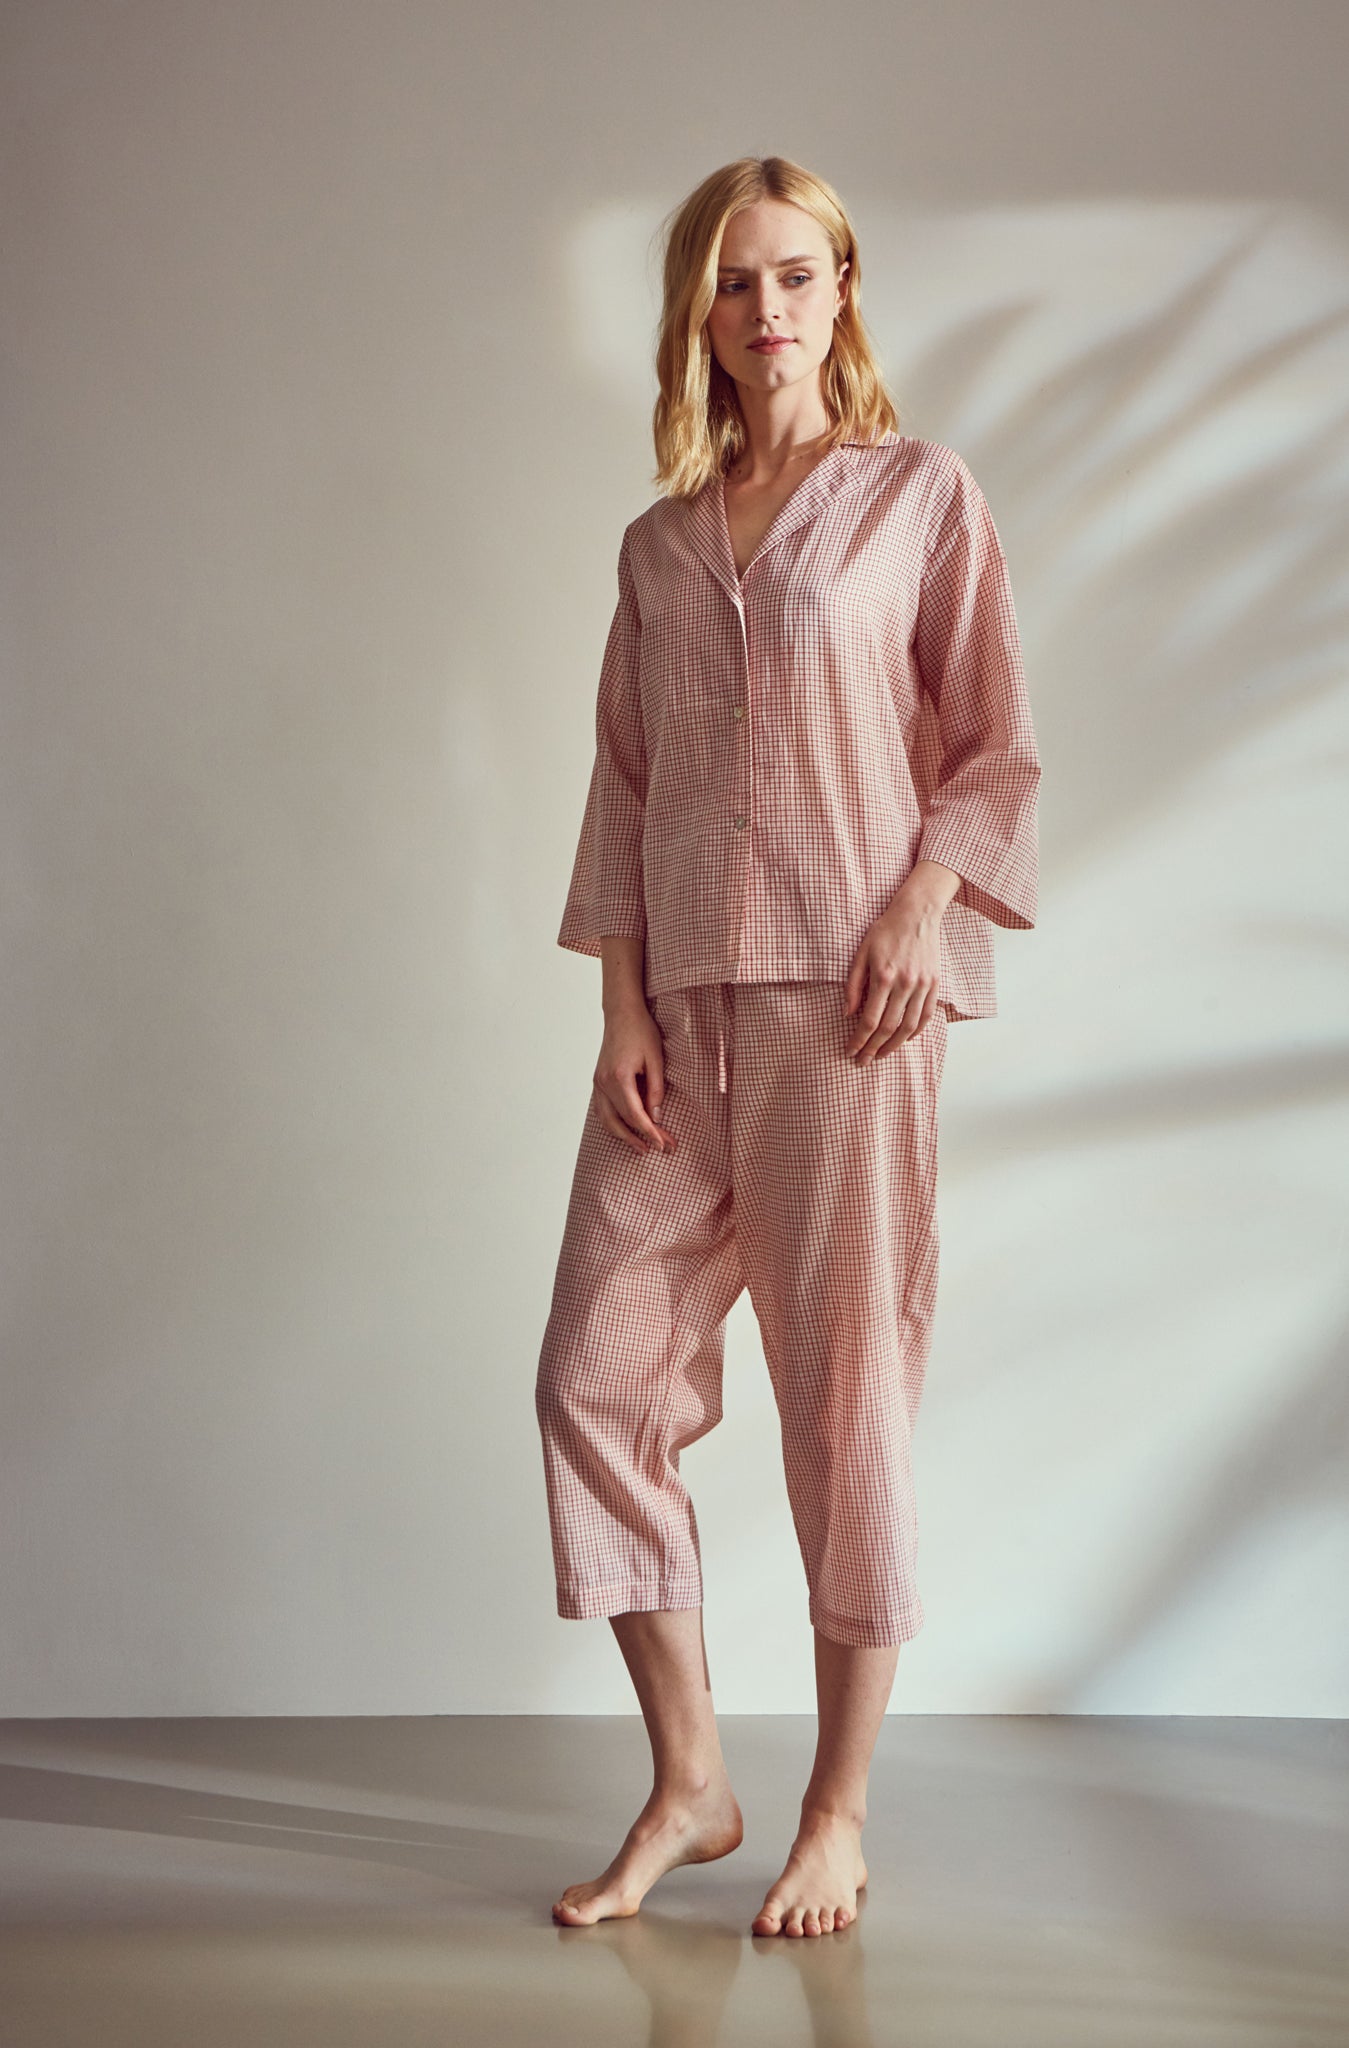 Luxury cotton red check pyjamas perfect for lightweight travel 